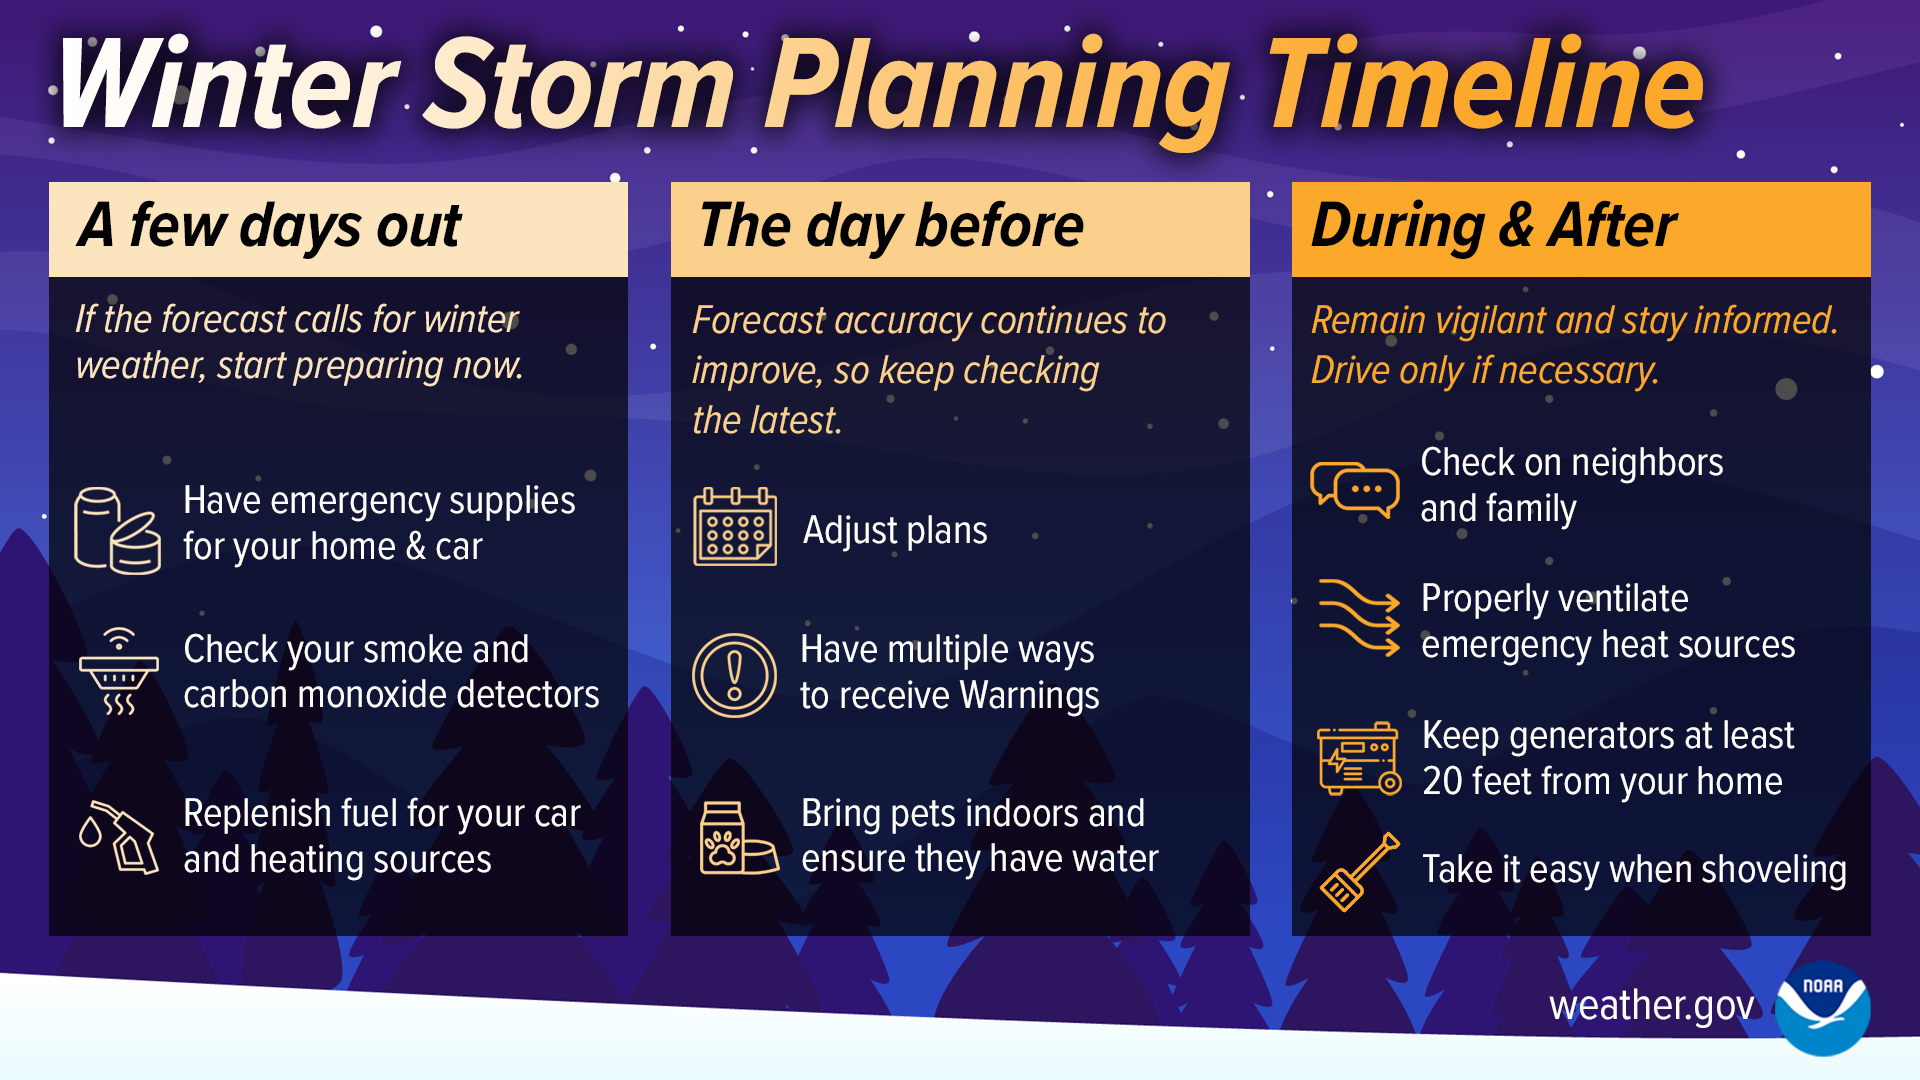 Here's a timeline for the approaching winter storm